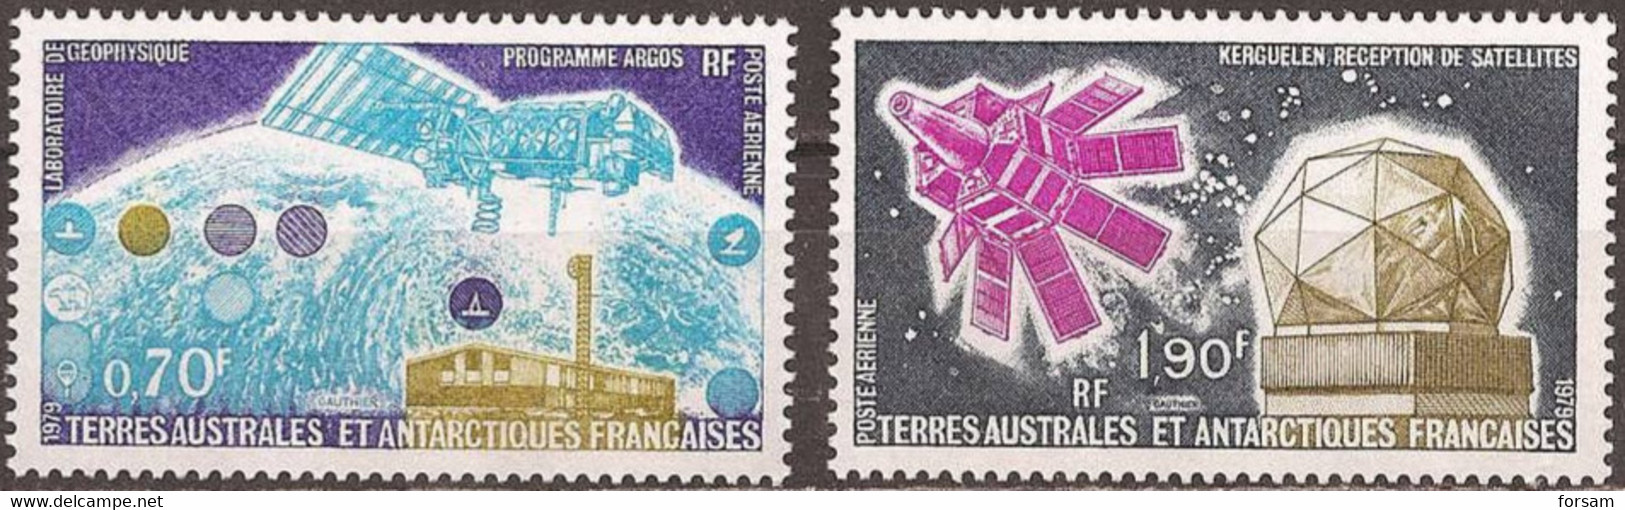 FRENCH SOUTHERN And ANTARCTIC TERR..1979..Michel # 128-129...MNH. - Nuevos